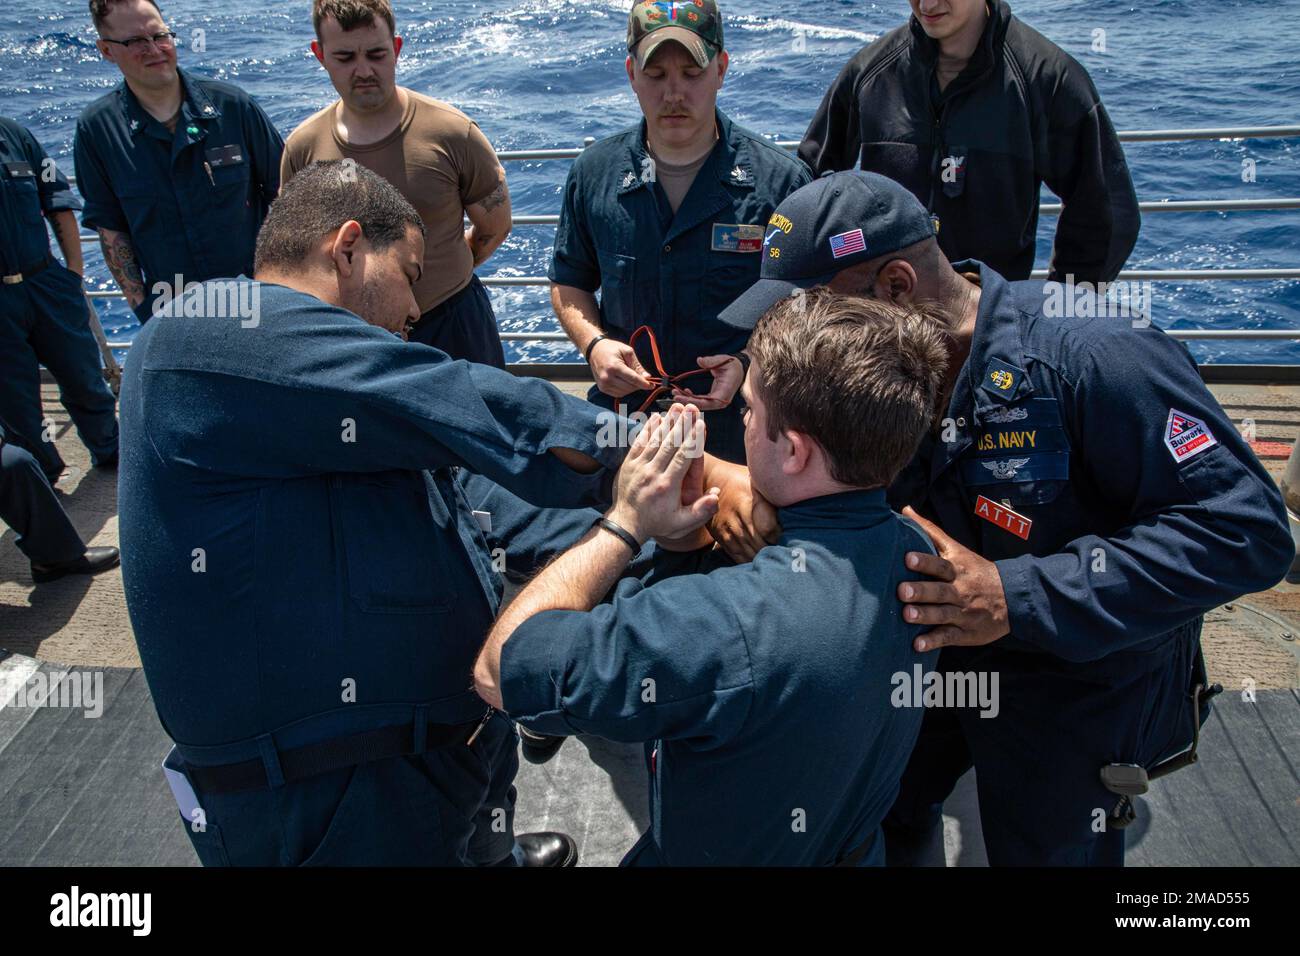 220525-N-AO868-1113 MEDITERRANEAN SEA (May 25, 2022) (Left to right) Personnel Specialist 1st Class Gervin Pimentel, Operations Specialist 3rd Class Bailey Byrd and Chief Master at Arms Travis Alston, practice using mechanical advantage control hold (MACH) take down maneuvers, during an antiterrorism training team evolution on the fan tail of the Ticonderoga-class guided-missile cruiser USS San Jacinto (CG 56), May 25, 2022. San Jacinto is on a scheduled deployment in the U.S. Naval Forces Europe area of operations, employed by U.S. Sixth Fleet to defend U.S., Allied and Partner interests. Stock Photo